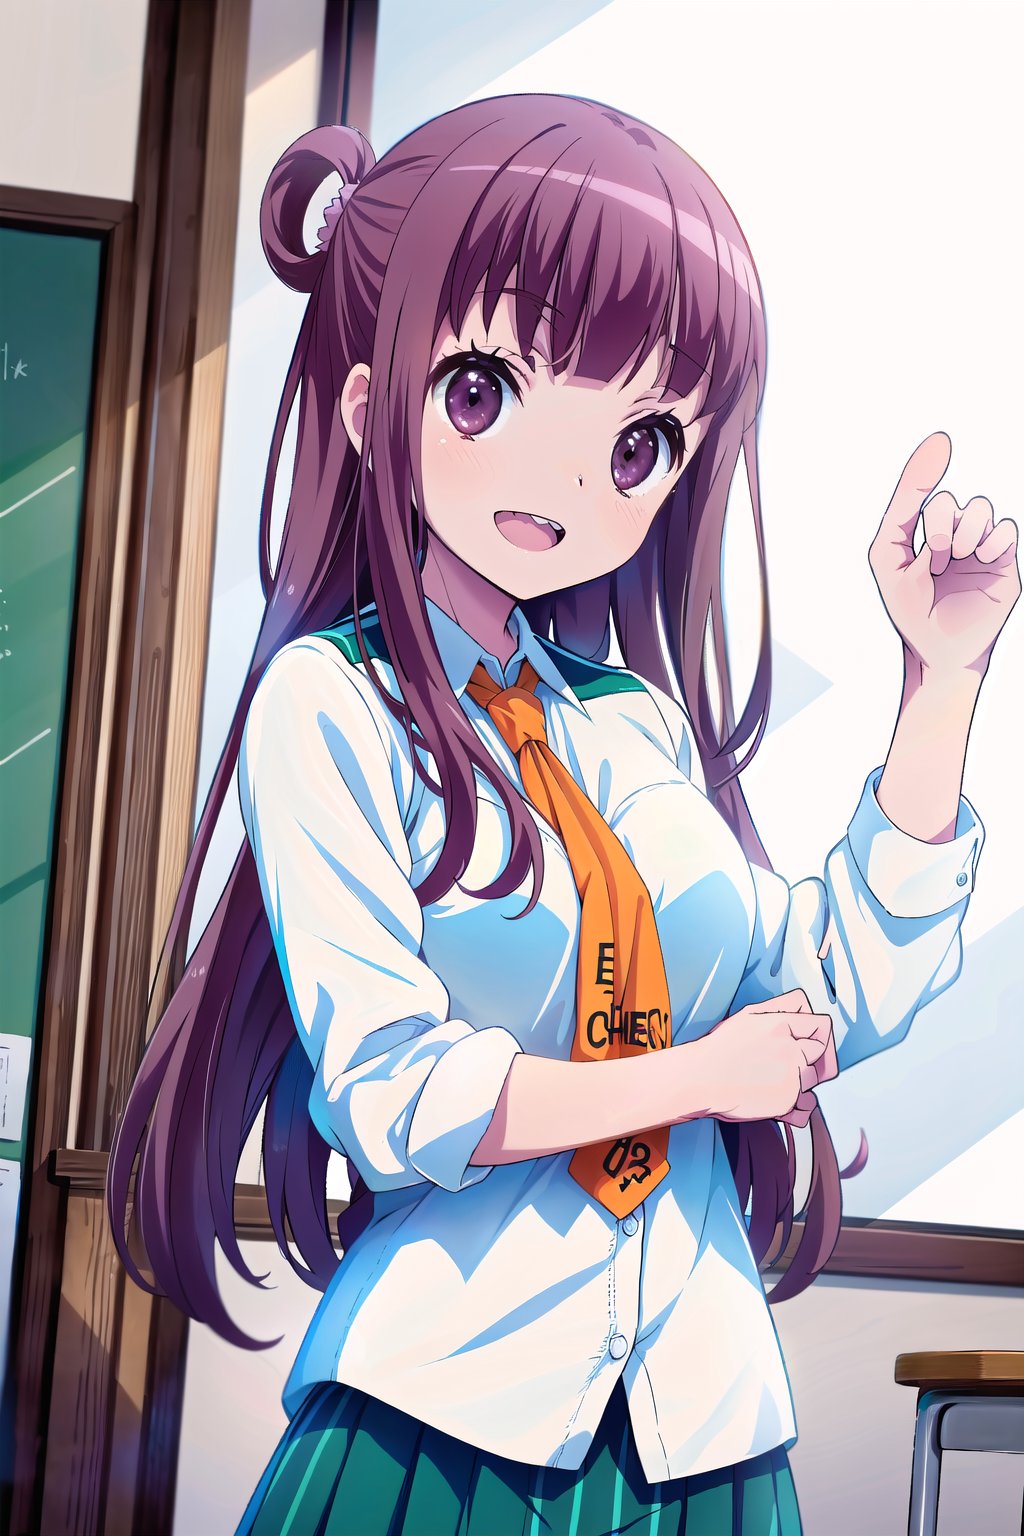 (masterpiece,Best  Quality, High Quality, Best Picture Quality Score: 1.3), (Sharp Picture Quality), Reddish purple hair, long hair, tied hair, Hair tied in a round knot,school uniform, orange tie, white blouse, Skirt with green and black vertical stripes, best smiles, classrooms,alone